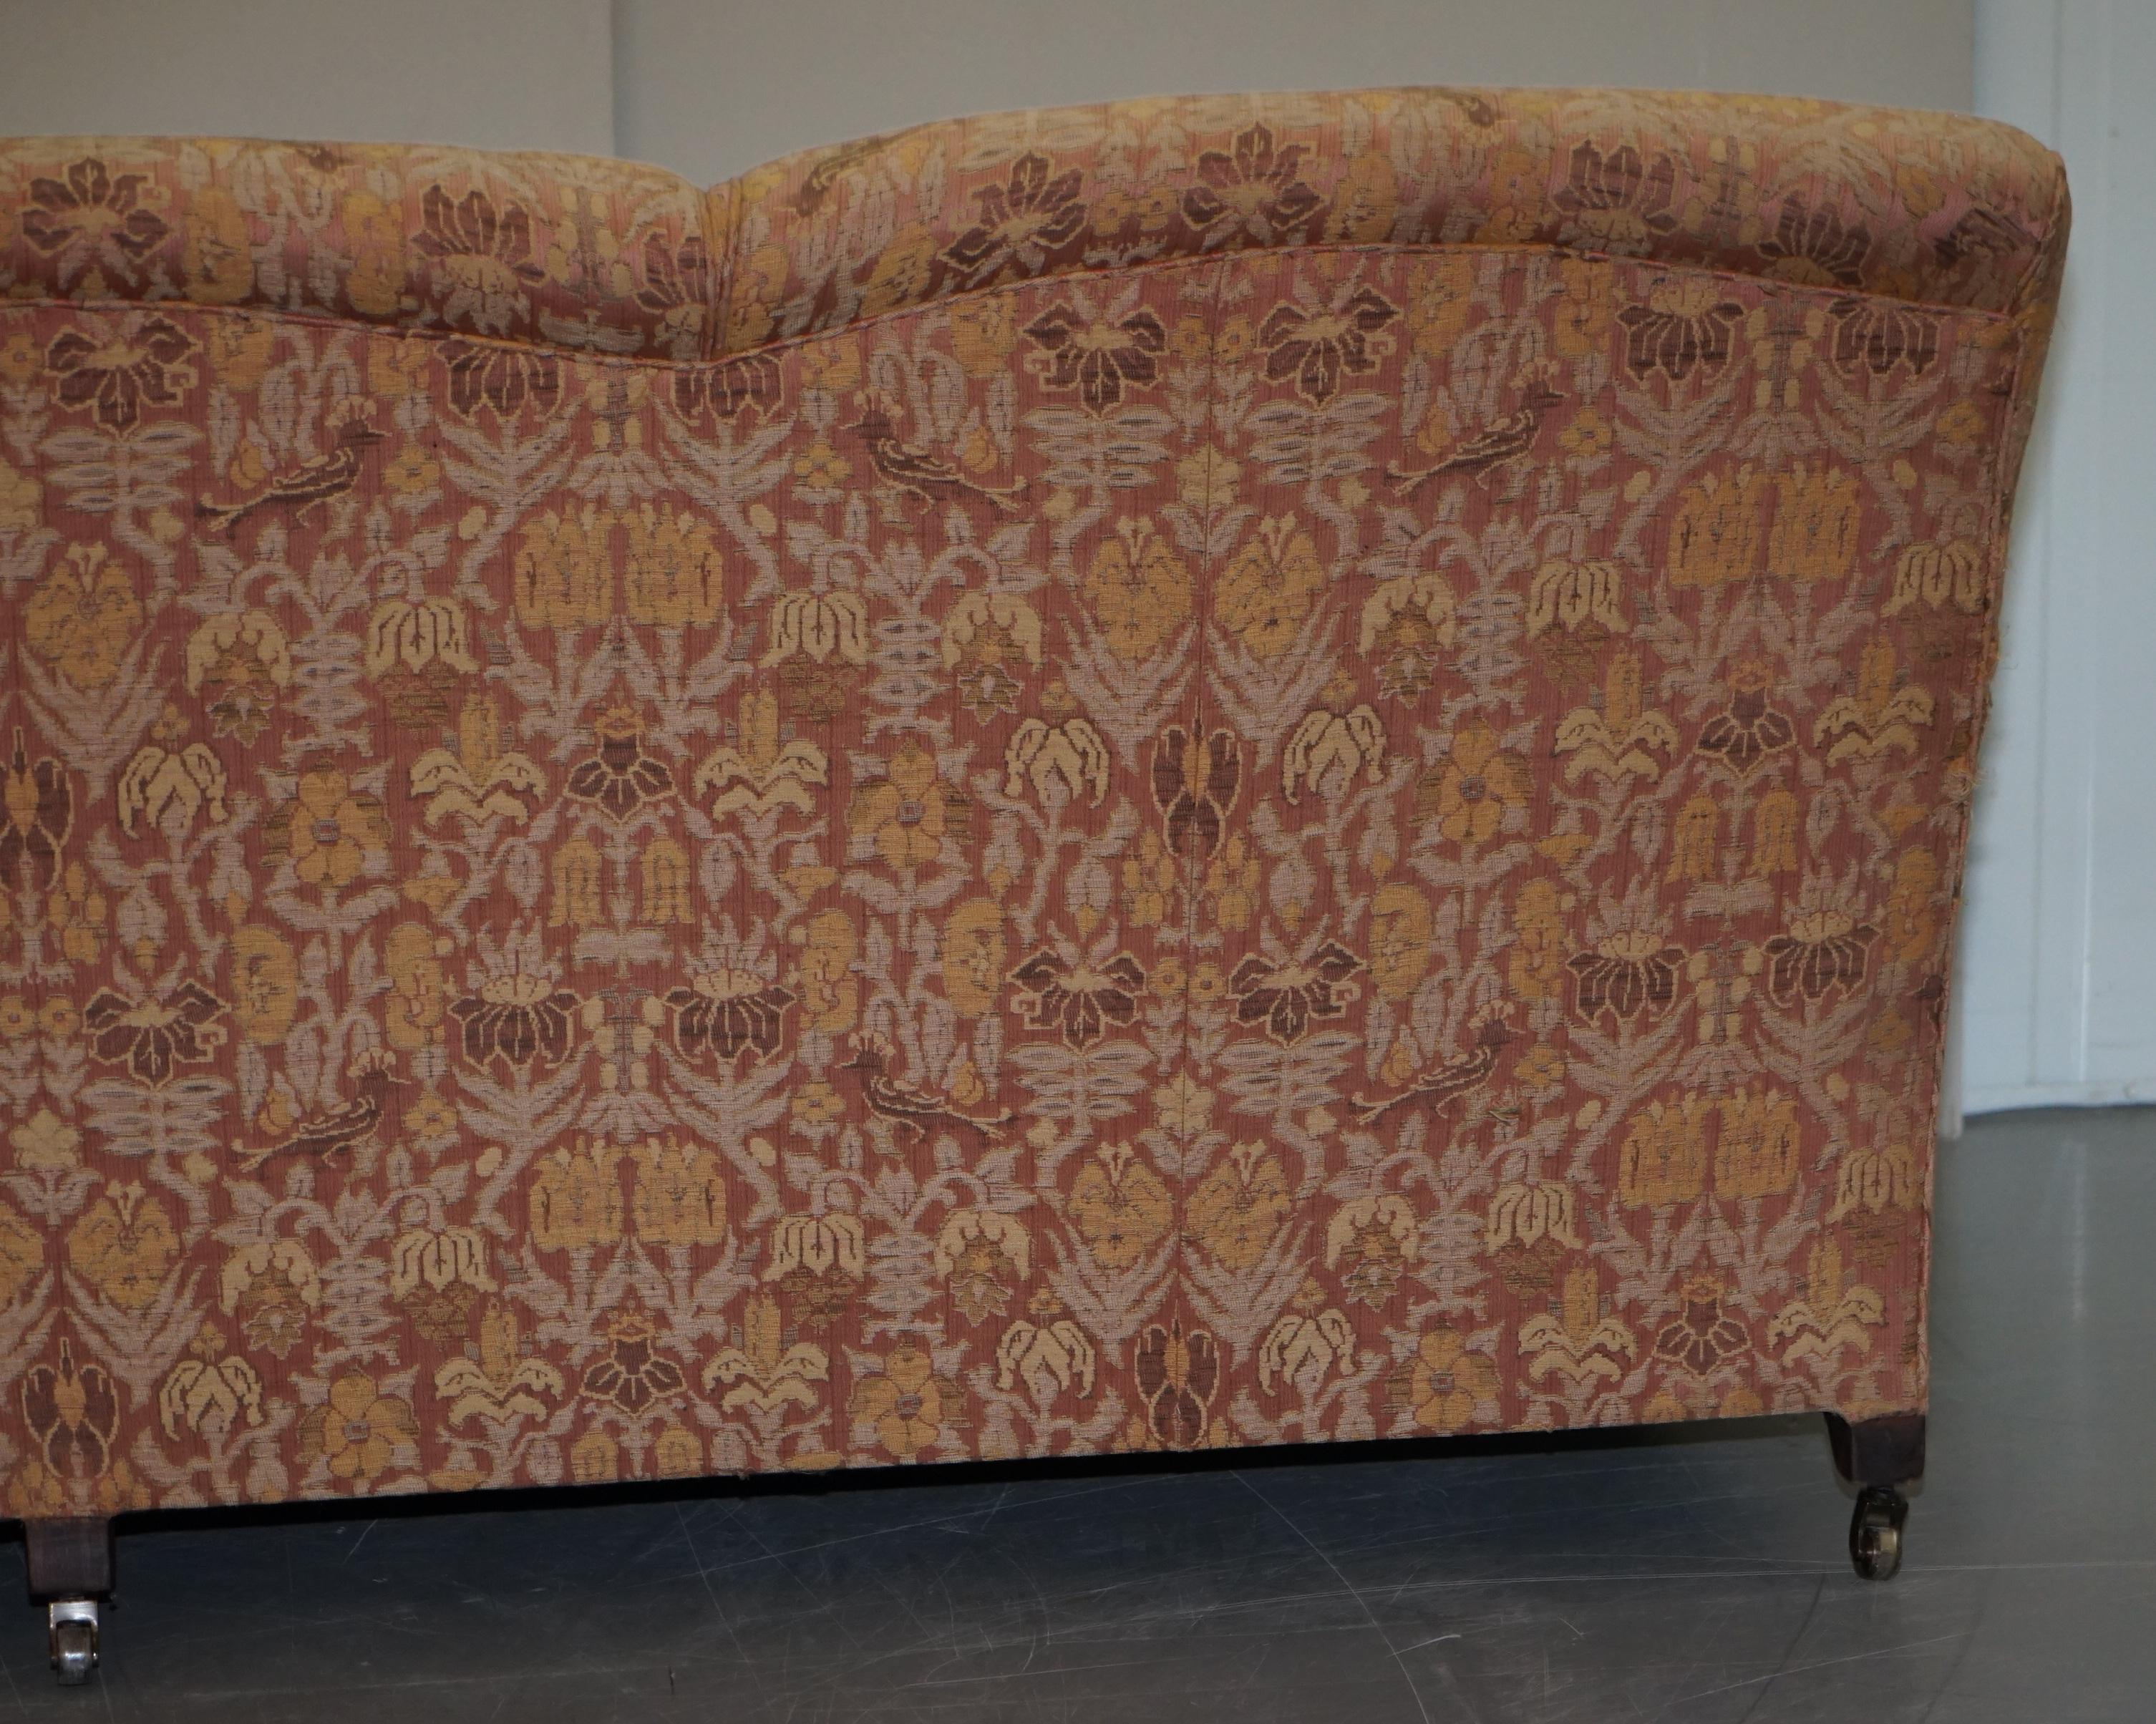 1 of 2 George Smith Scroll Arm Three-Seat Sofas Embroidered Fabric 9